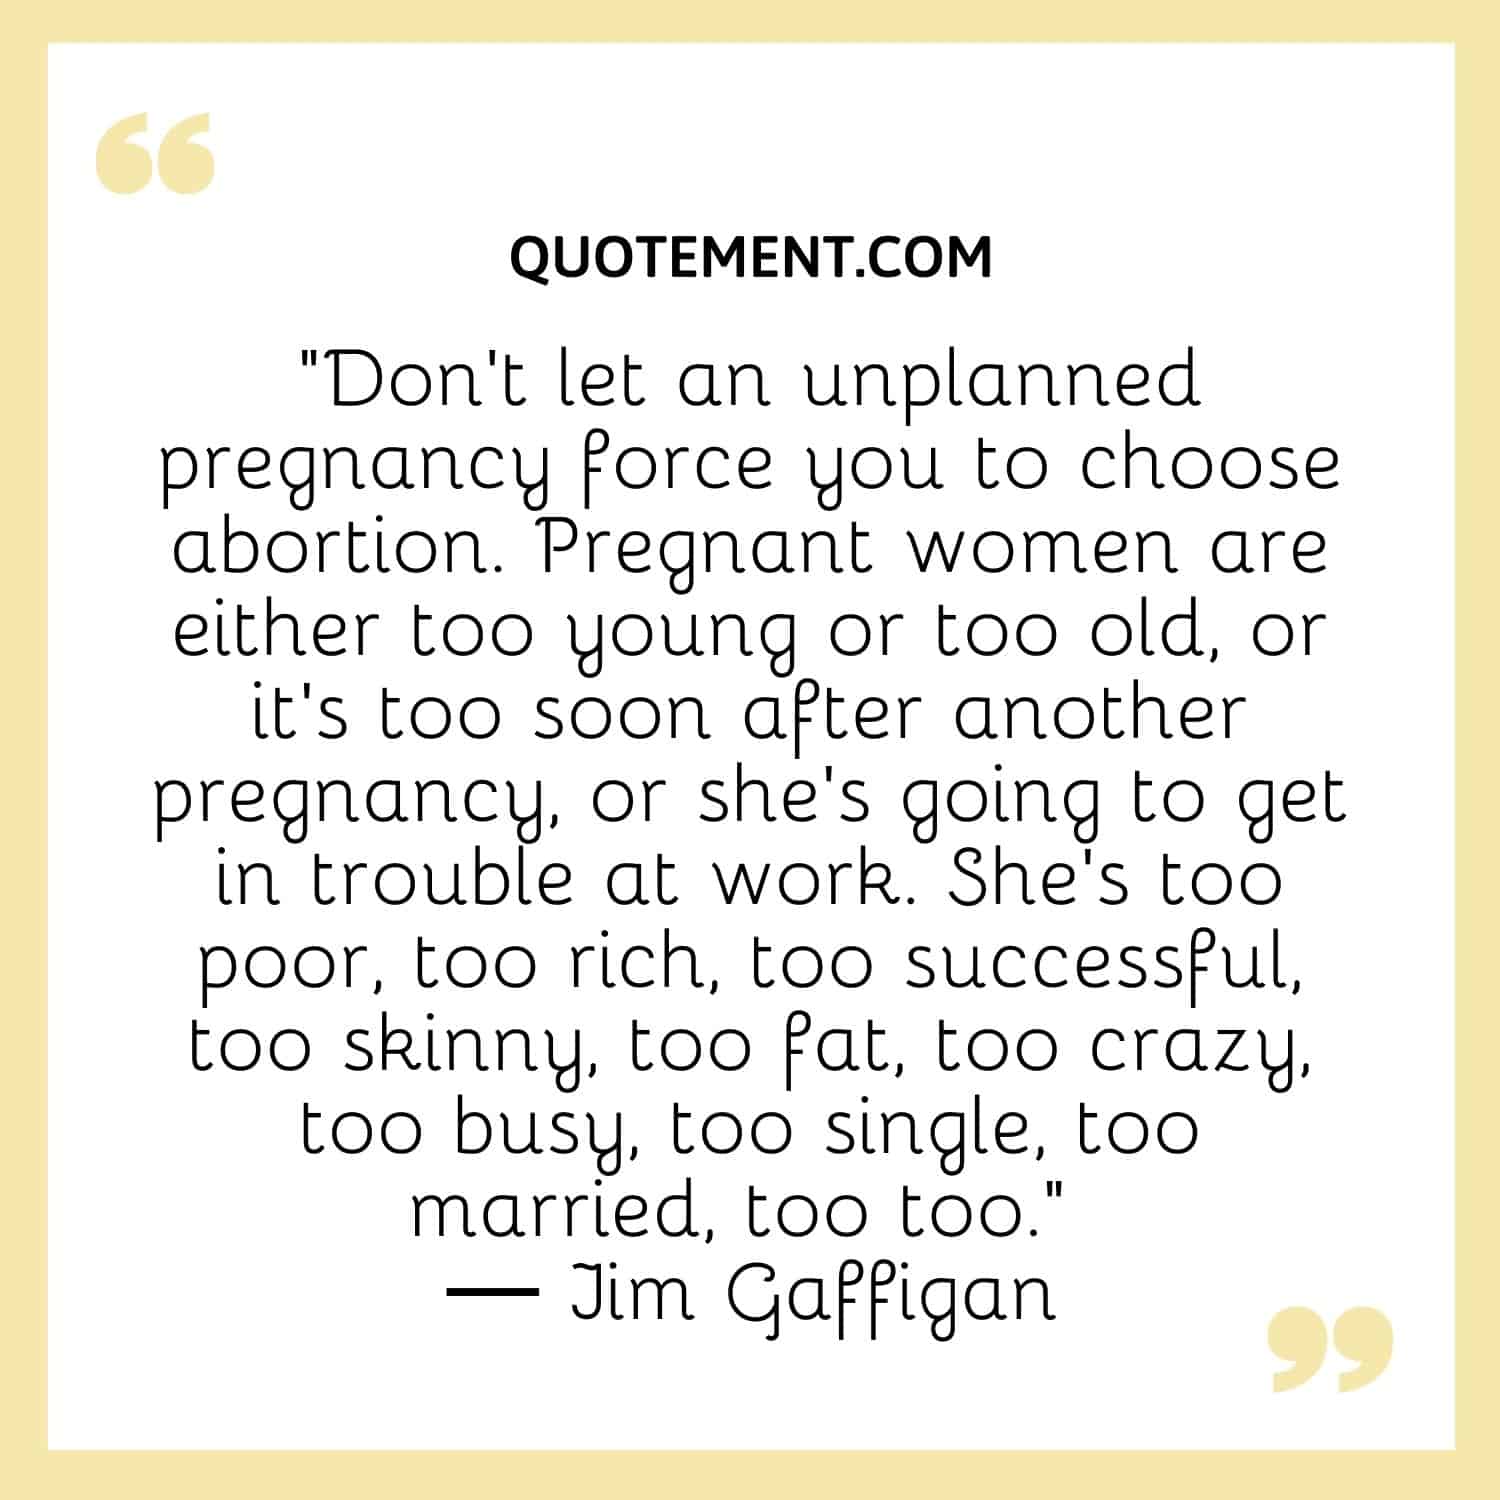 Don’t let an unplanned pregnancy force you to choose abortion.